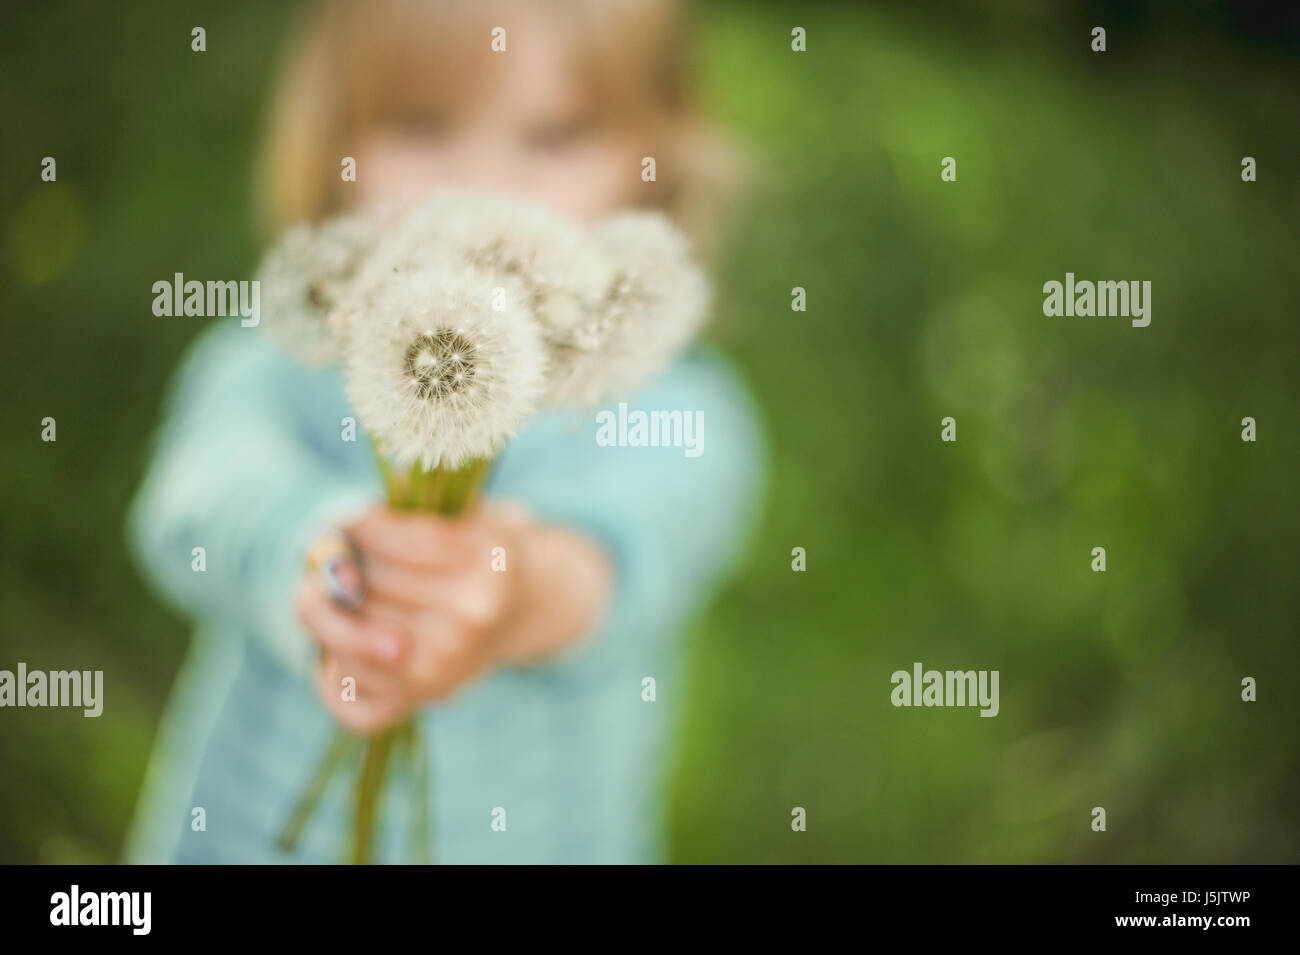 little girl holding a bouquet of dandelions with shallow depth of field Stock Photo